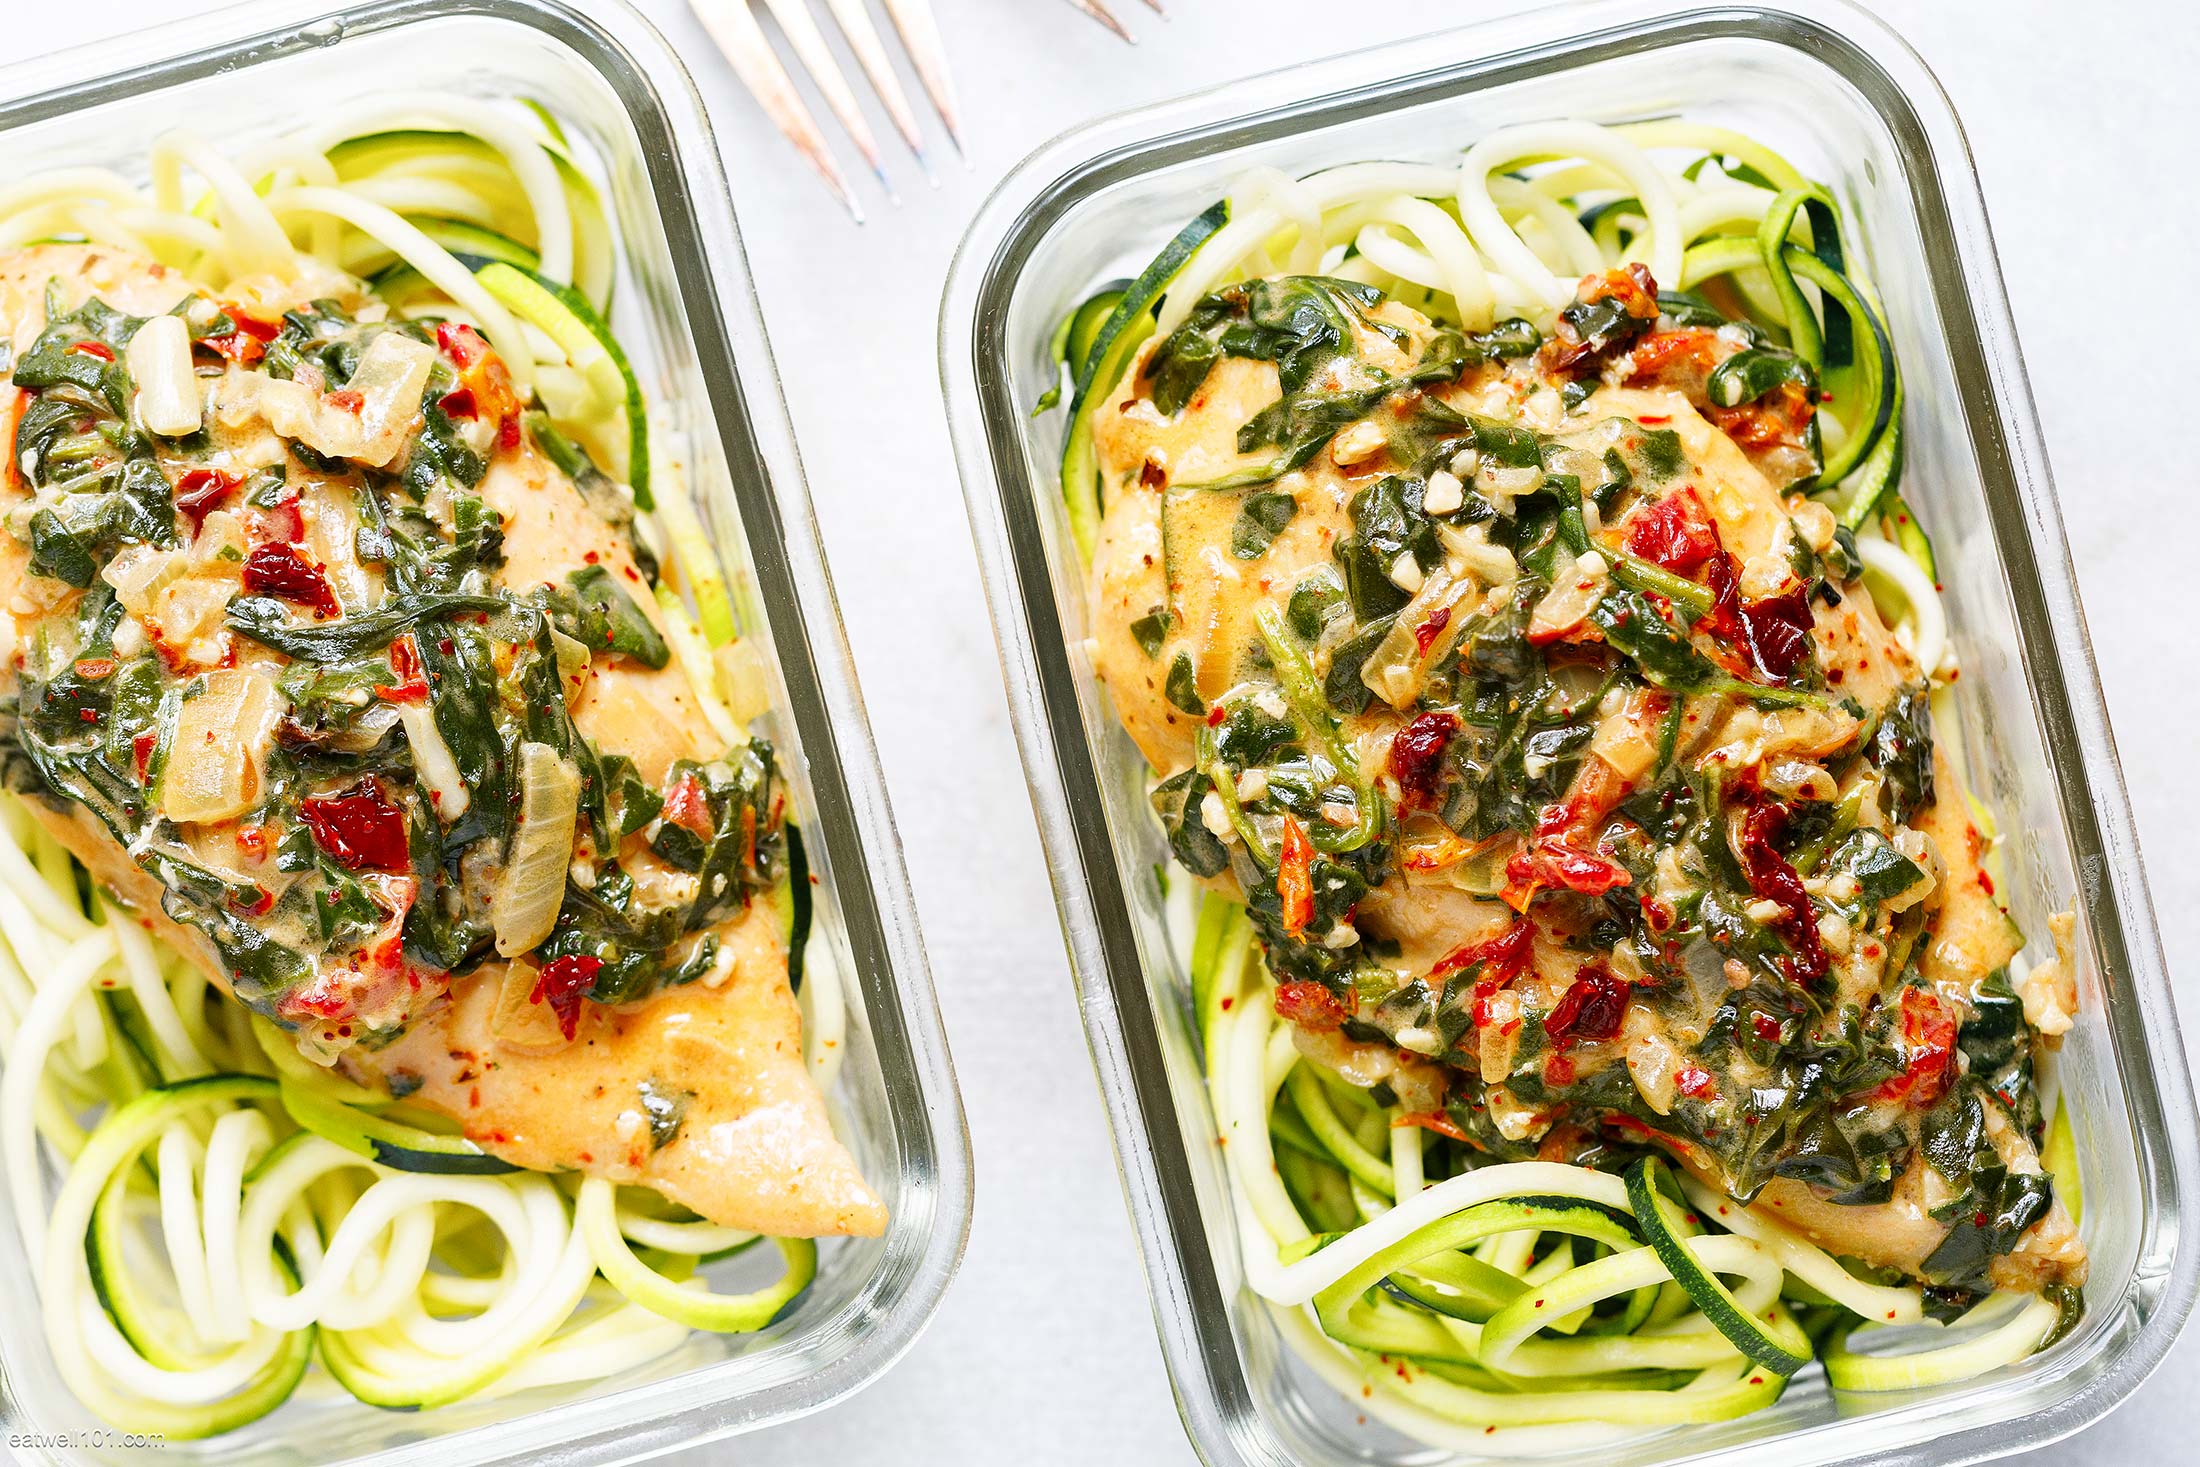 7 Easy Meal Prep Ideas For When You Have No Idea What To Cook